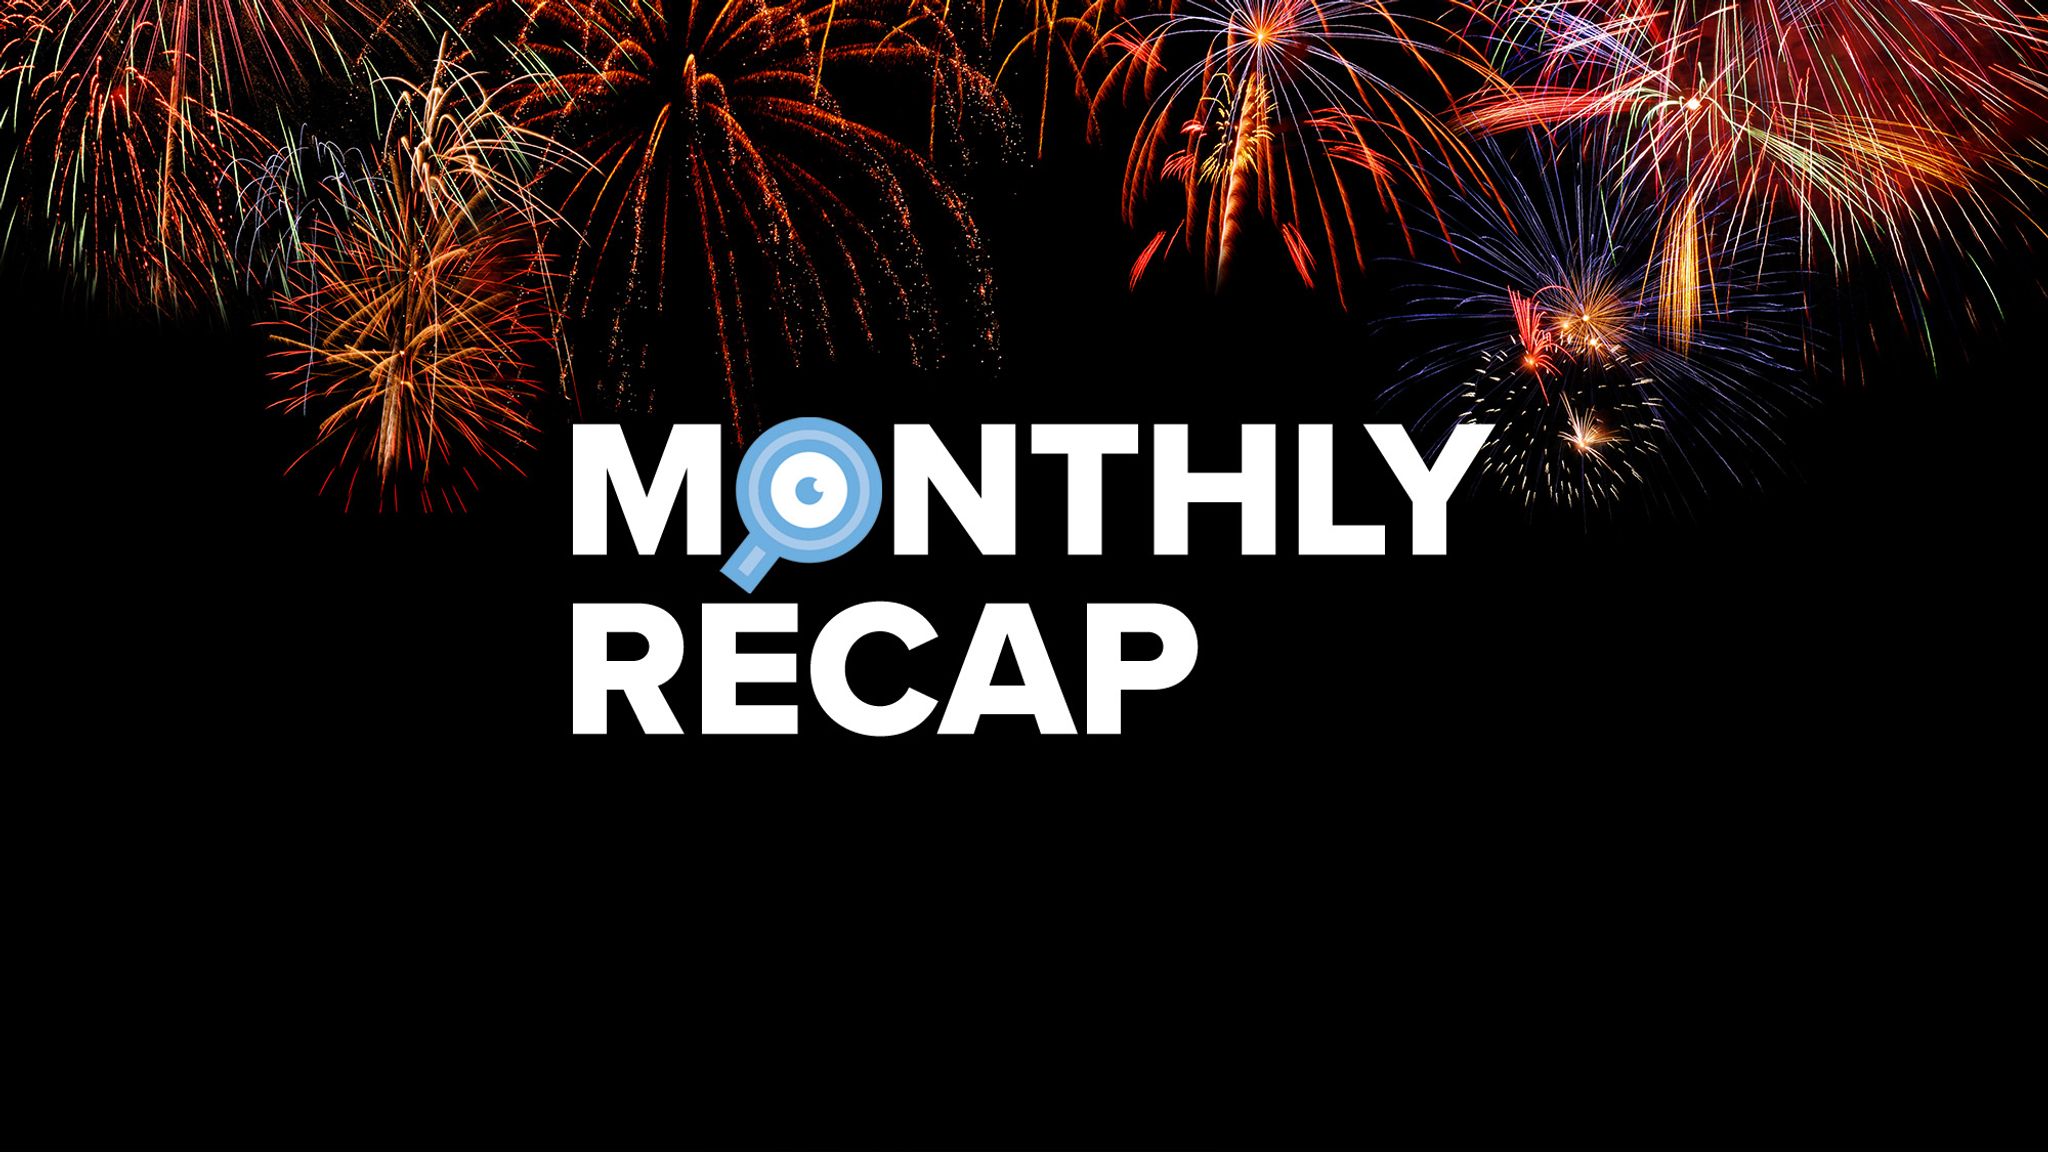 Monthly Recap with fireworks in background